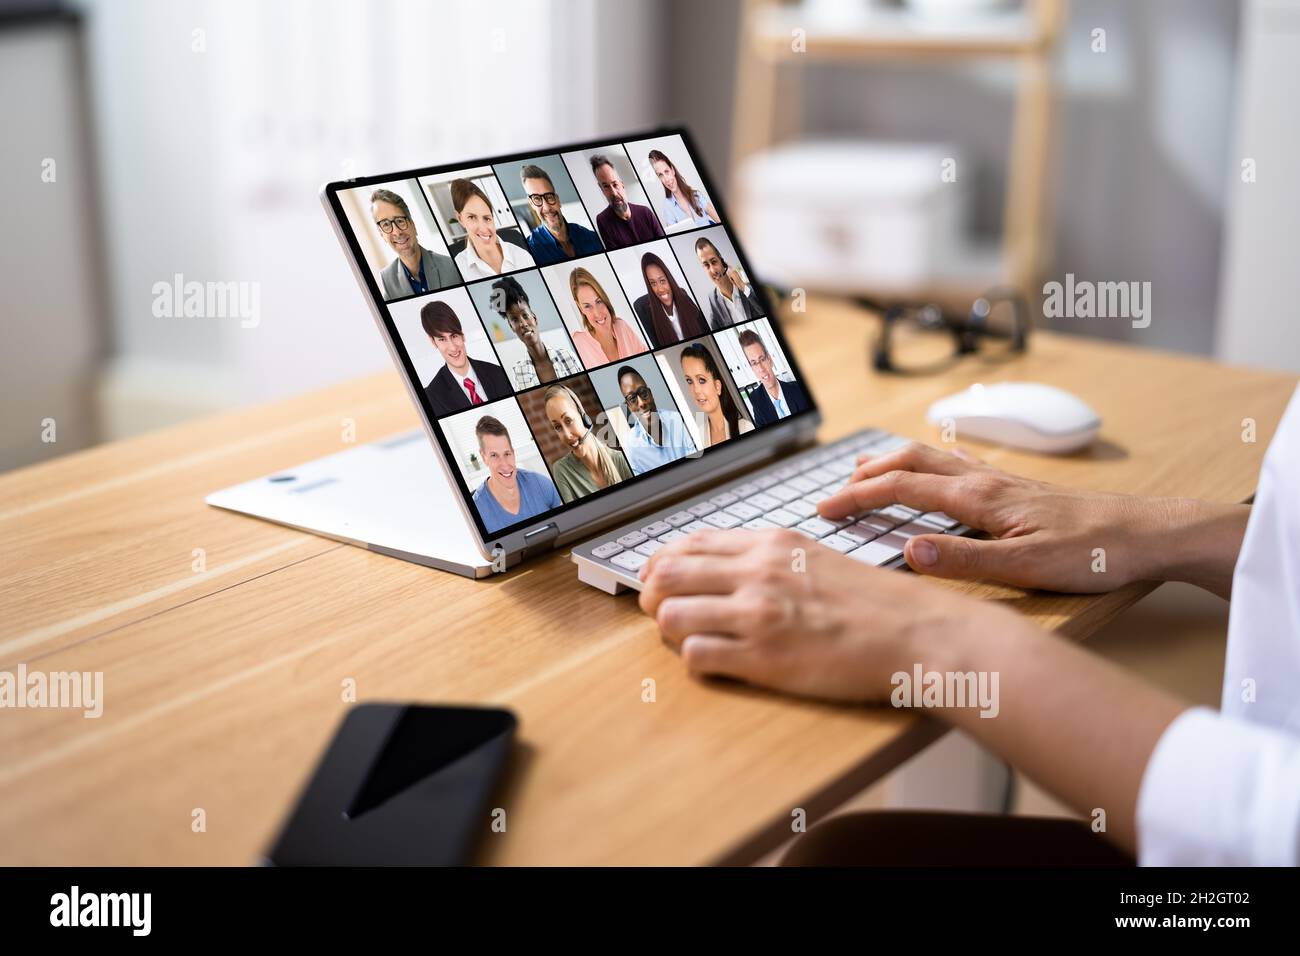 Video Conference Webinar Online Call Meeting On Laptop Stock Photo